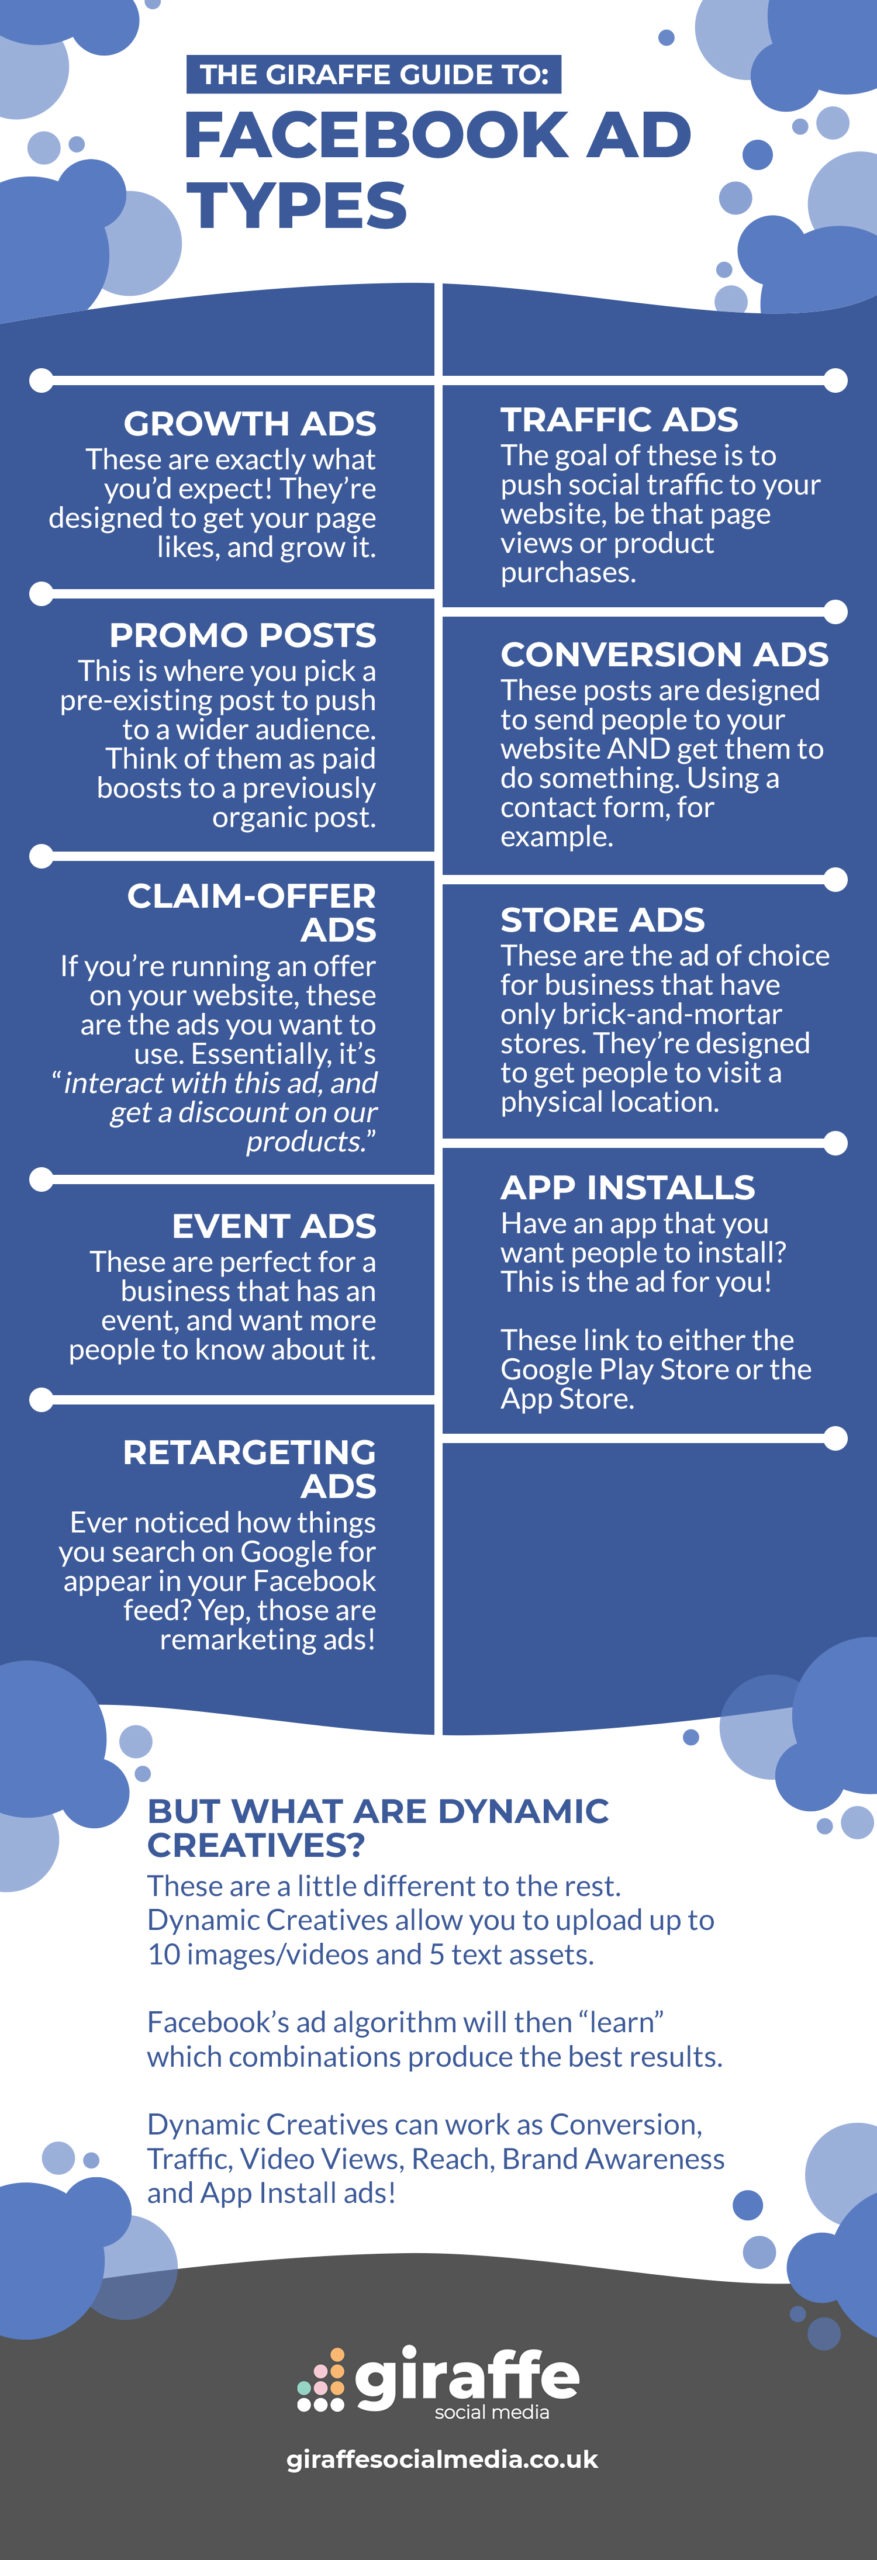 Facebook ad types infographic